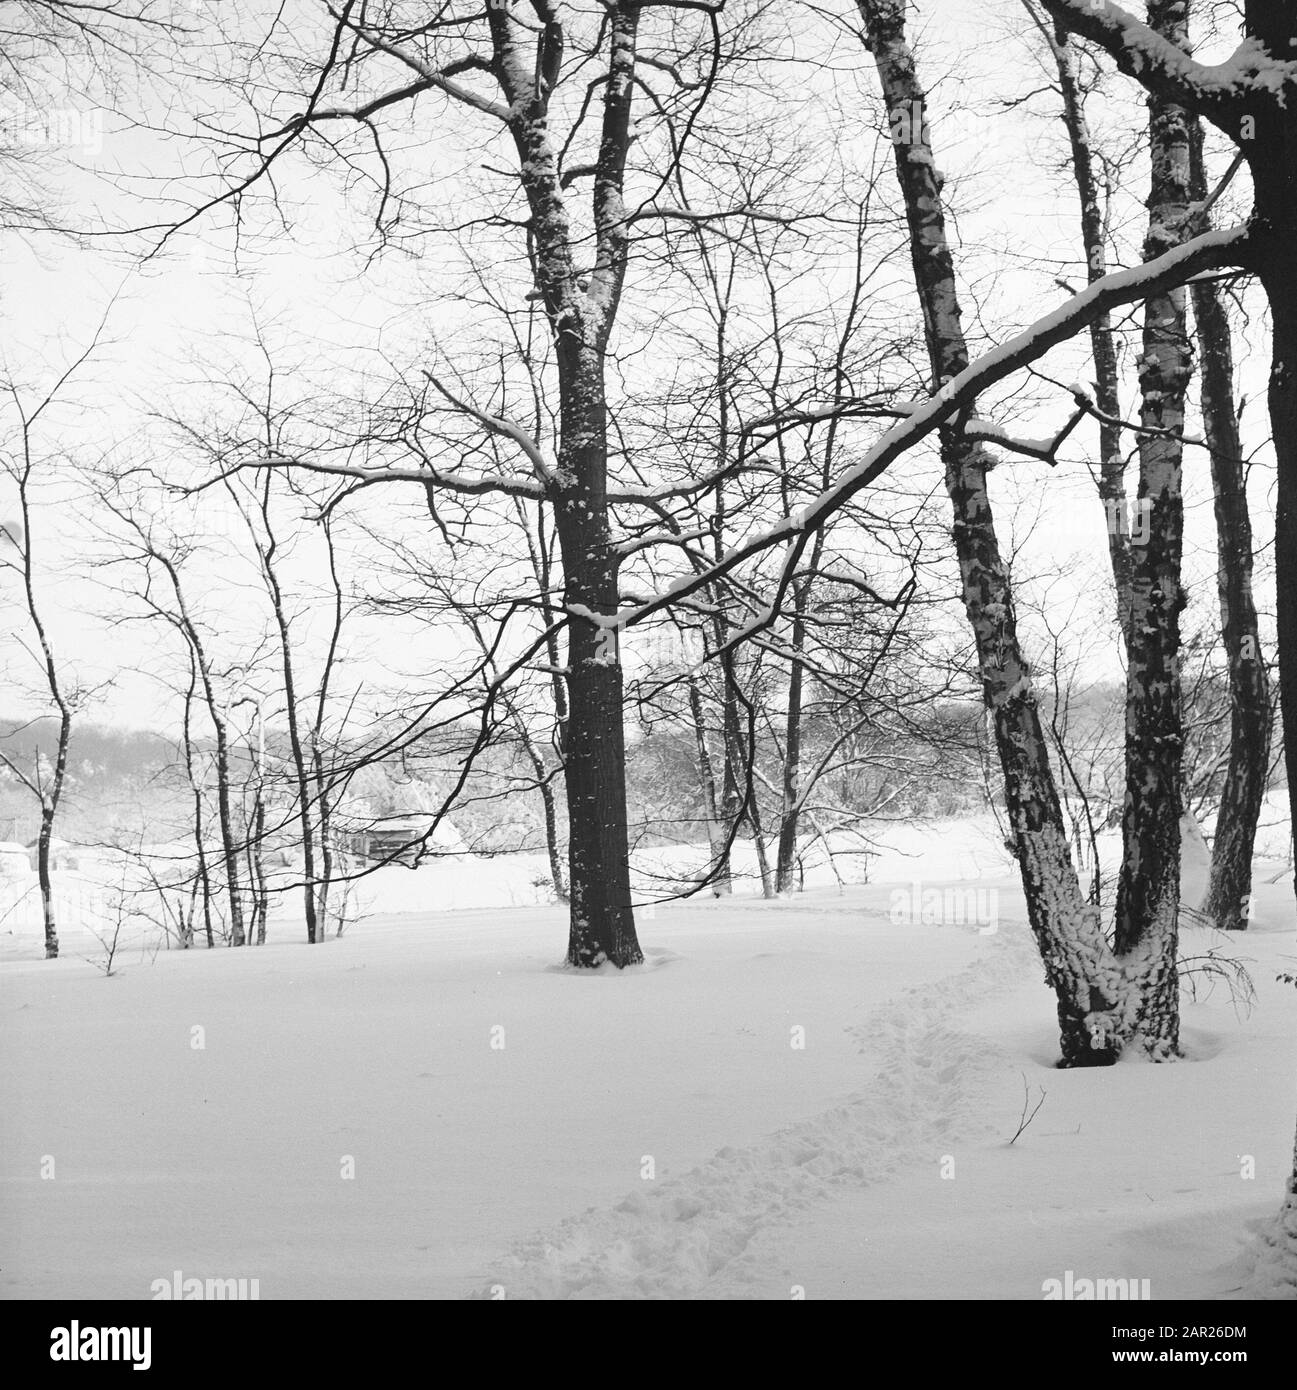 Park Zijpendaal in the winter Date: February 1958 Location: Arnhem Keywords: landscapes, natural beauty, parks, snow, winter, wild lands Stock Photo